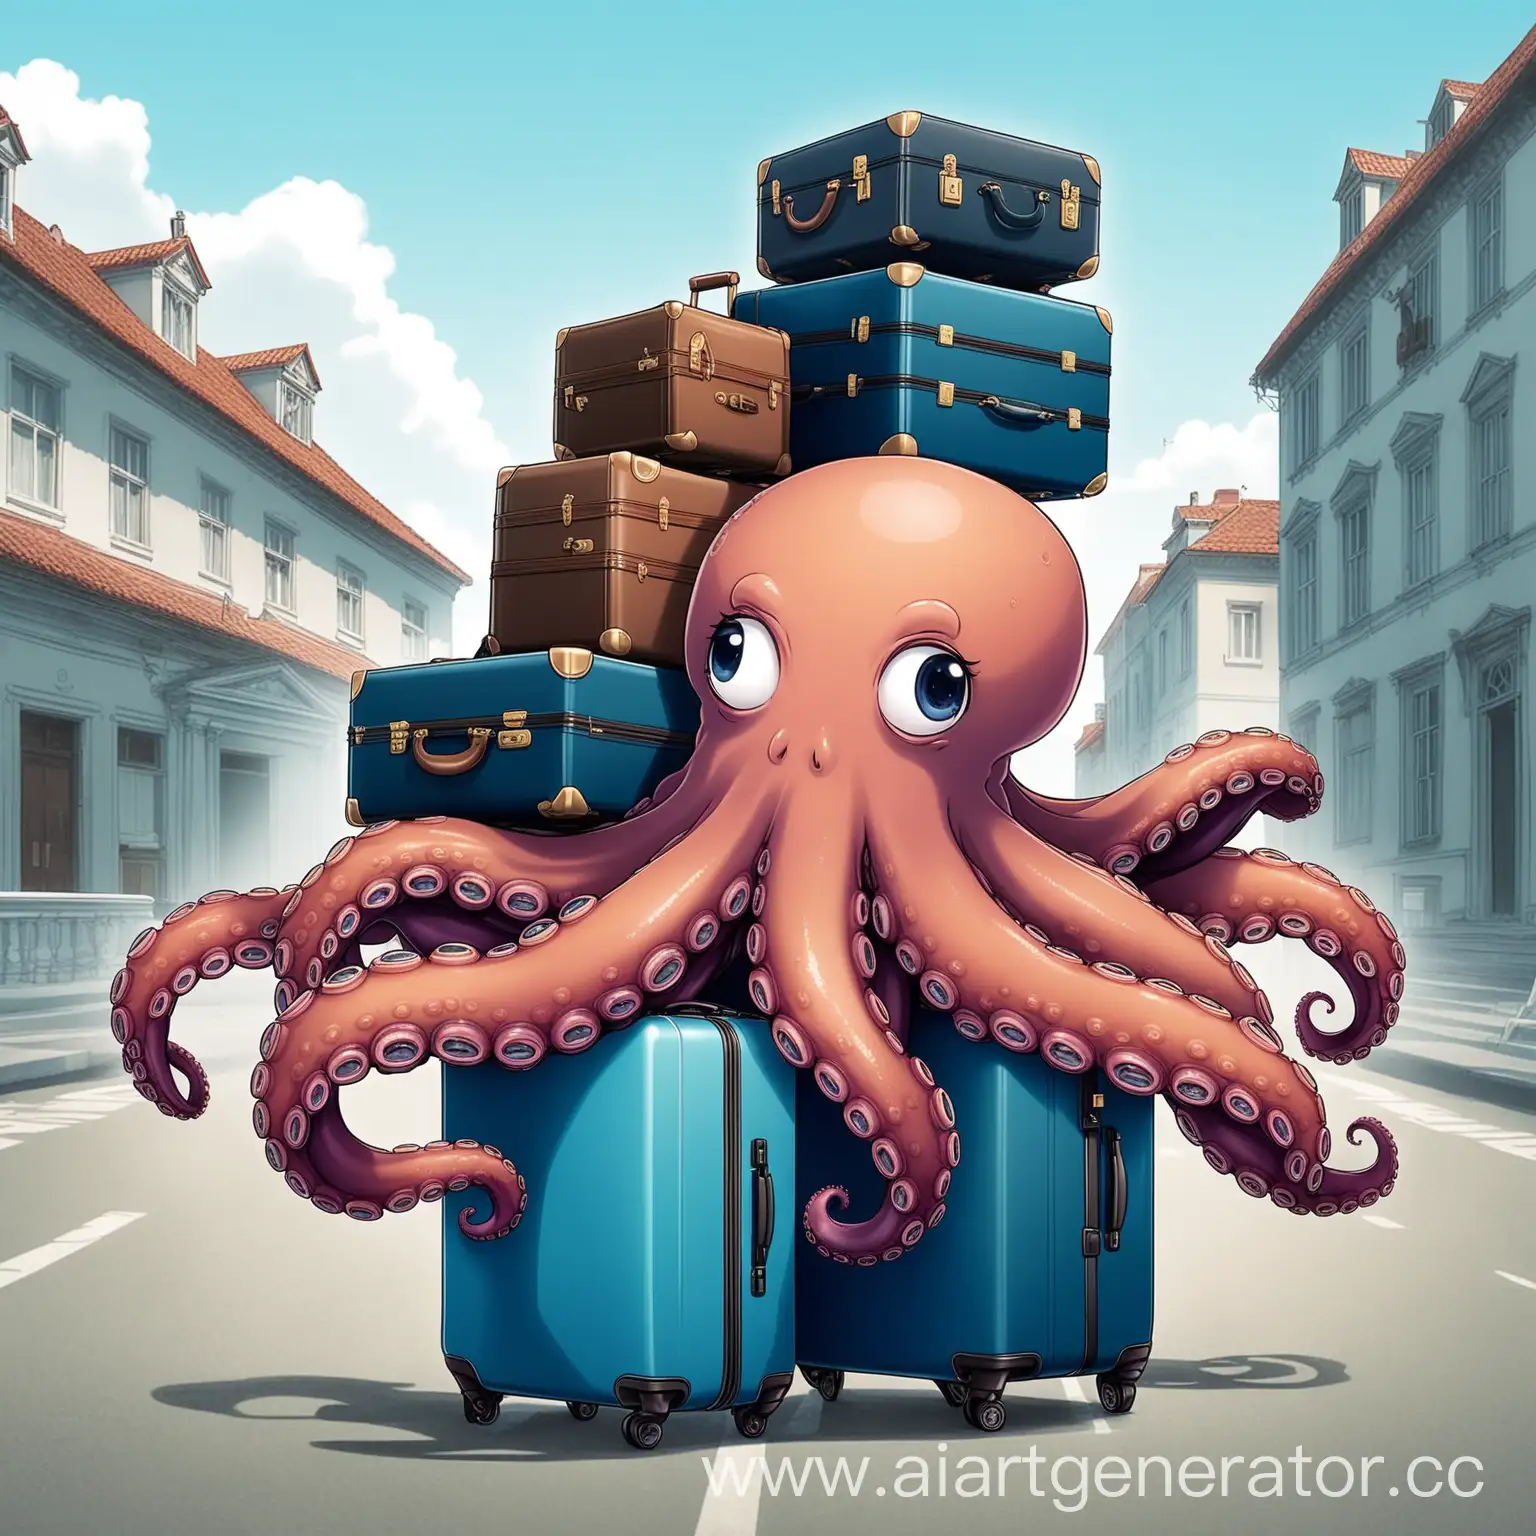 Octopus-Carrying-Four-Suitcases-Whimsical-Underwater-Travel-Scene